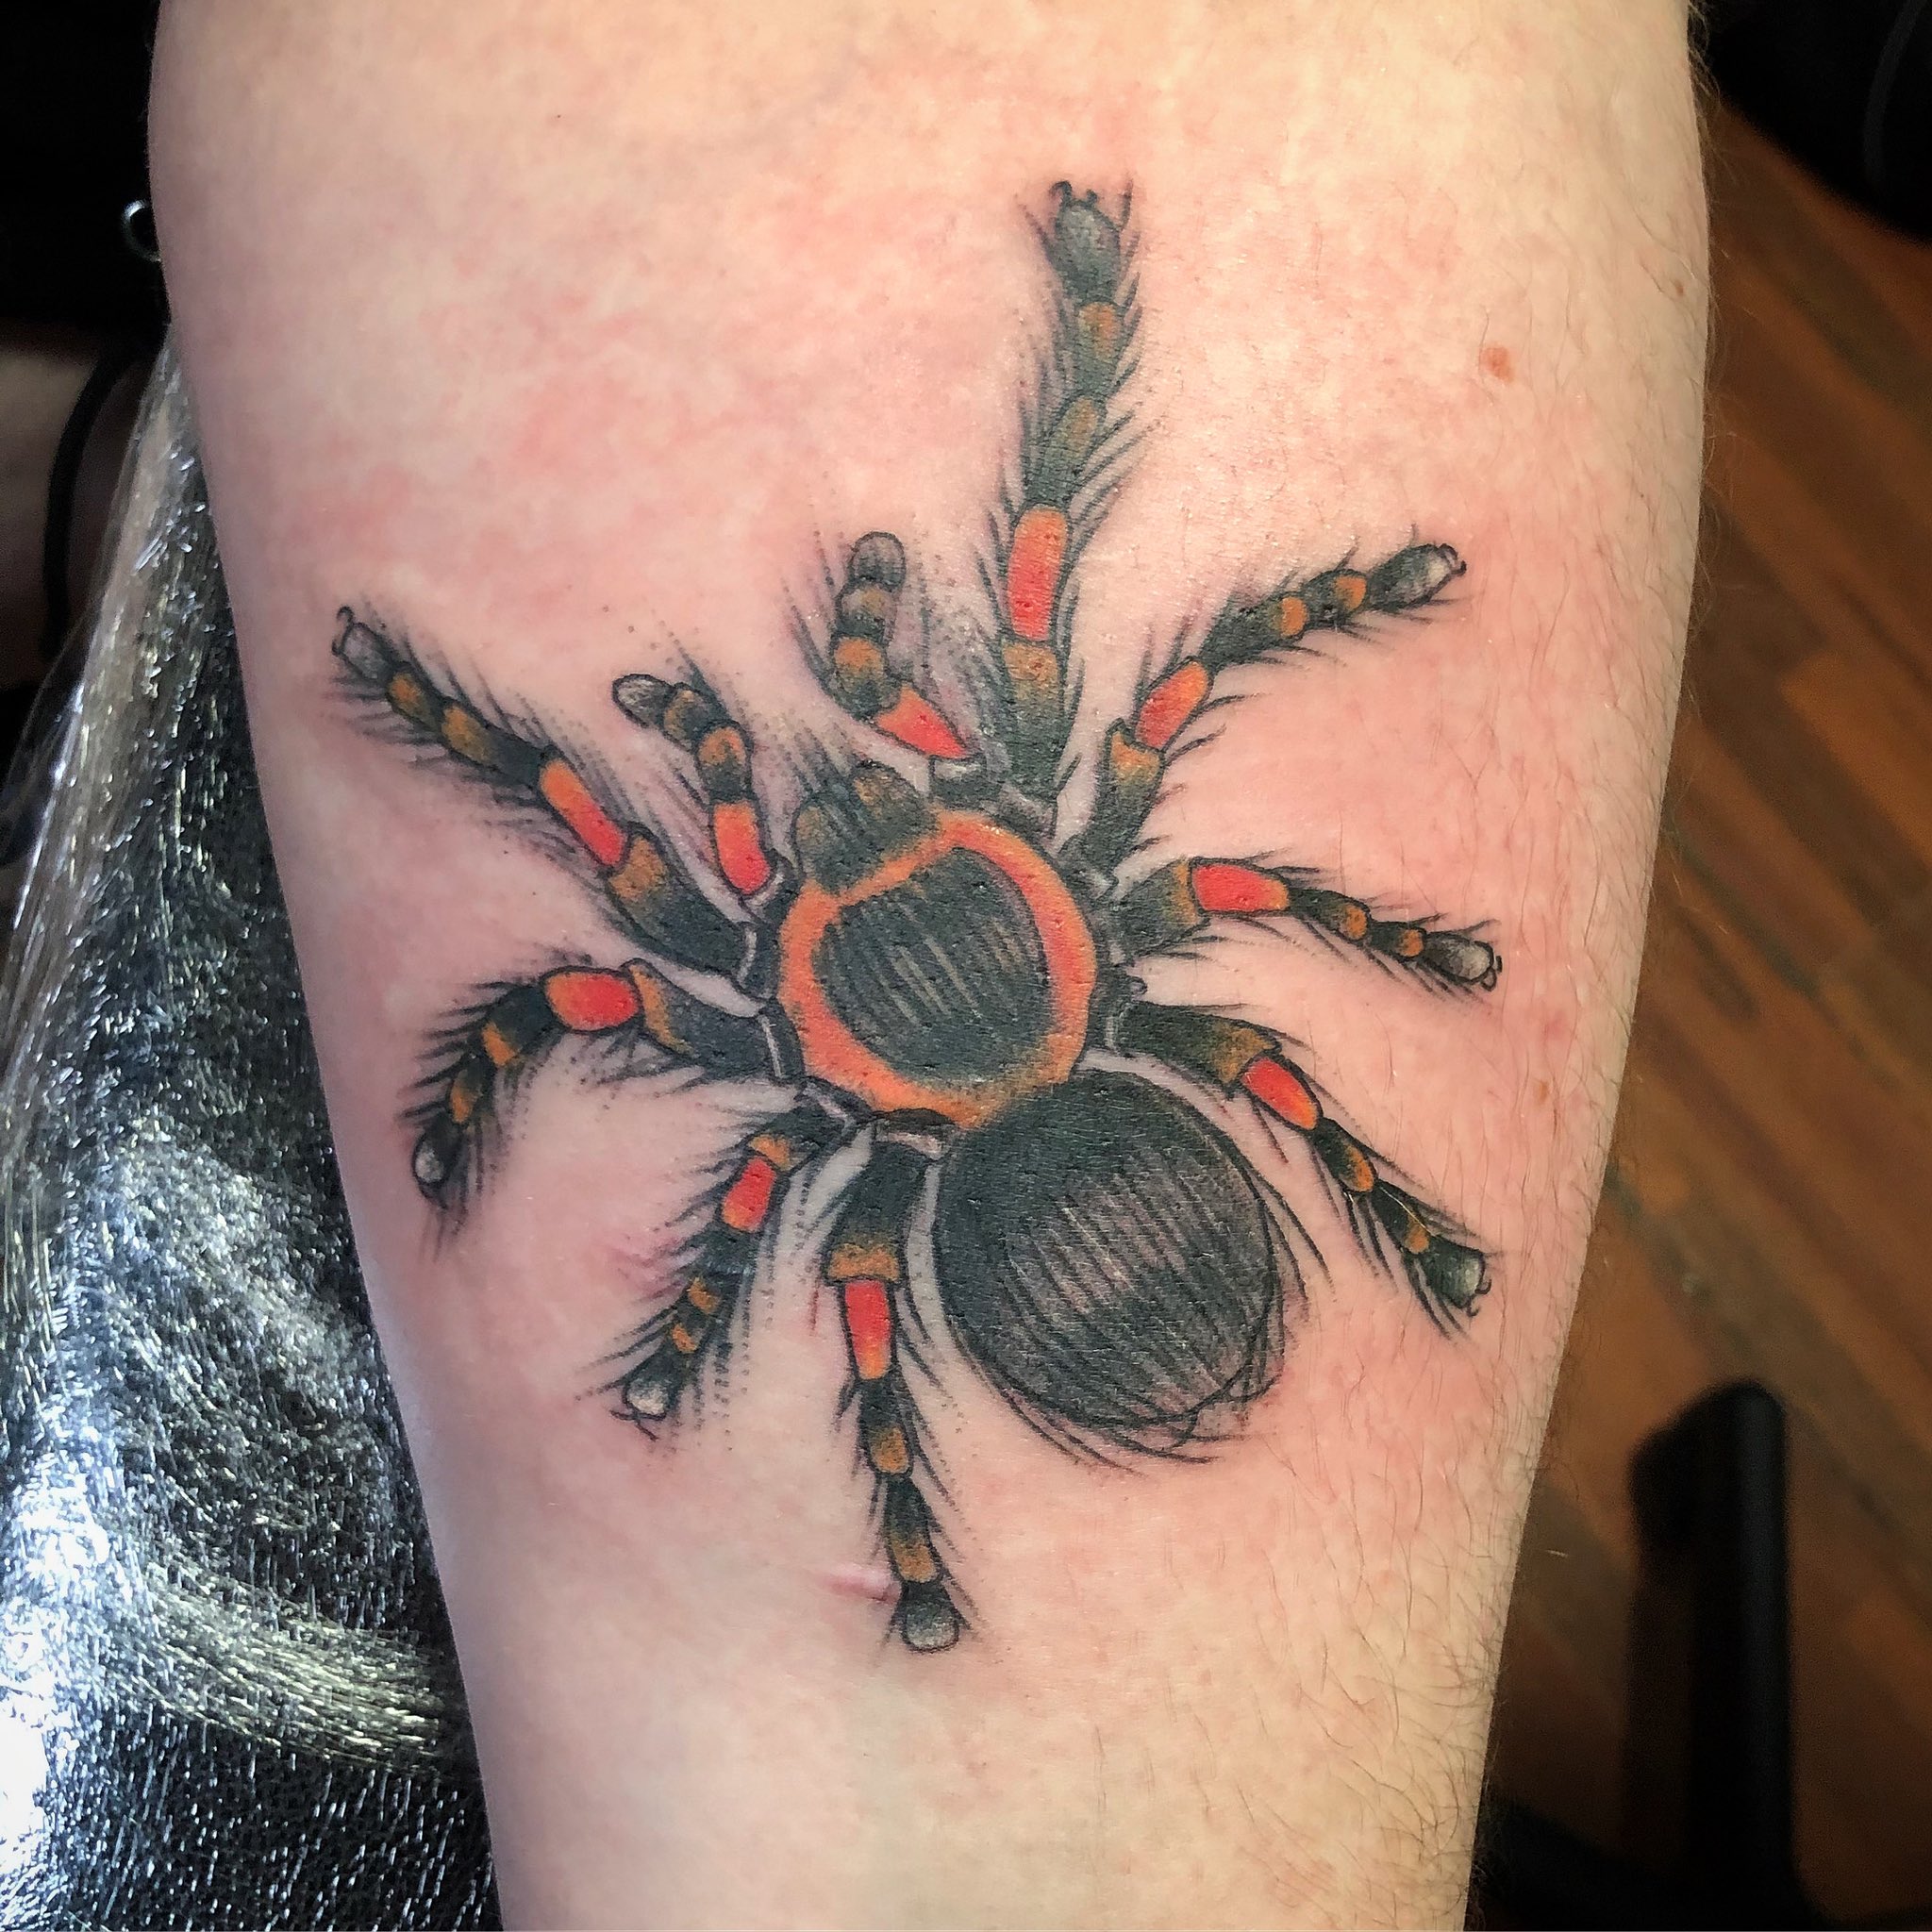 🔥Atomic Tattoo - Austin, Texas🔥 | Check out this totally rad spider tattoo  by @naultergeist at the 2800 S I35 Atomic Tattoo in South Austin. 🕷🕷🕷  🕸🕸🕸�... | Instagram